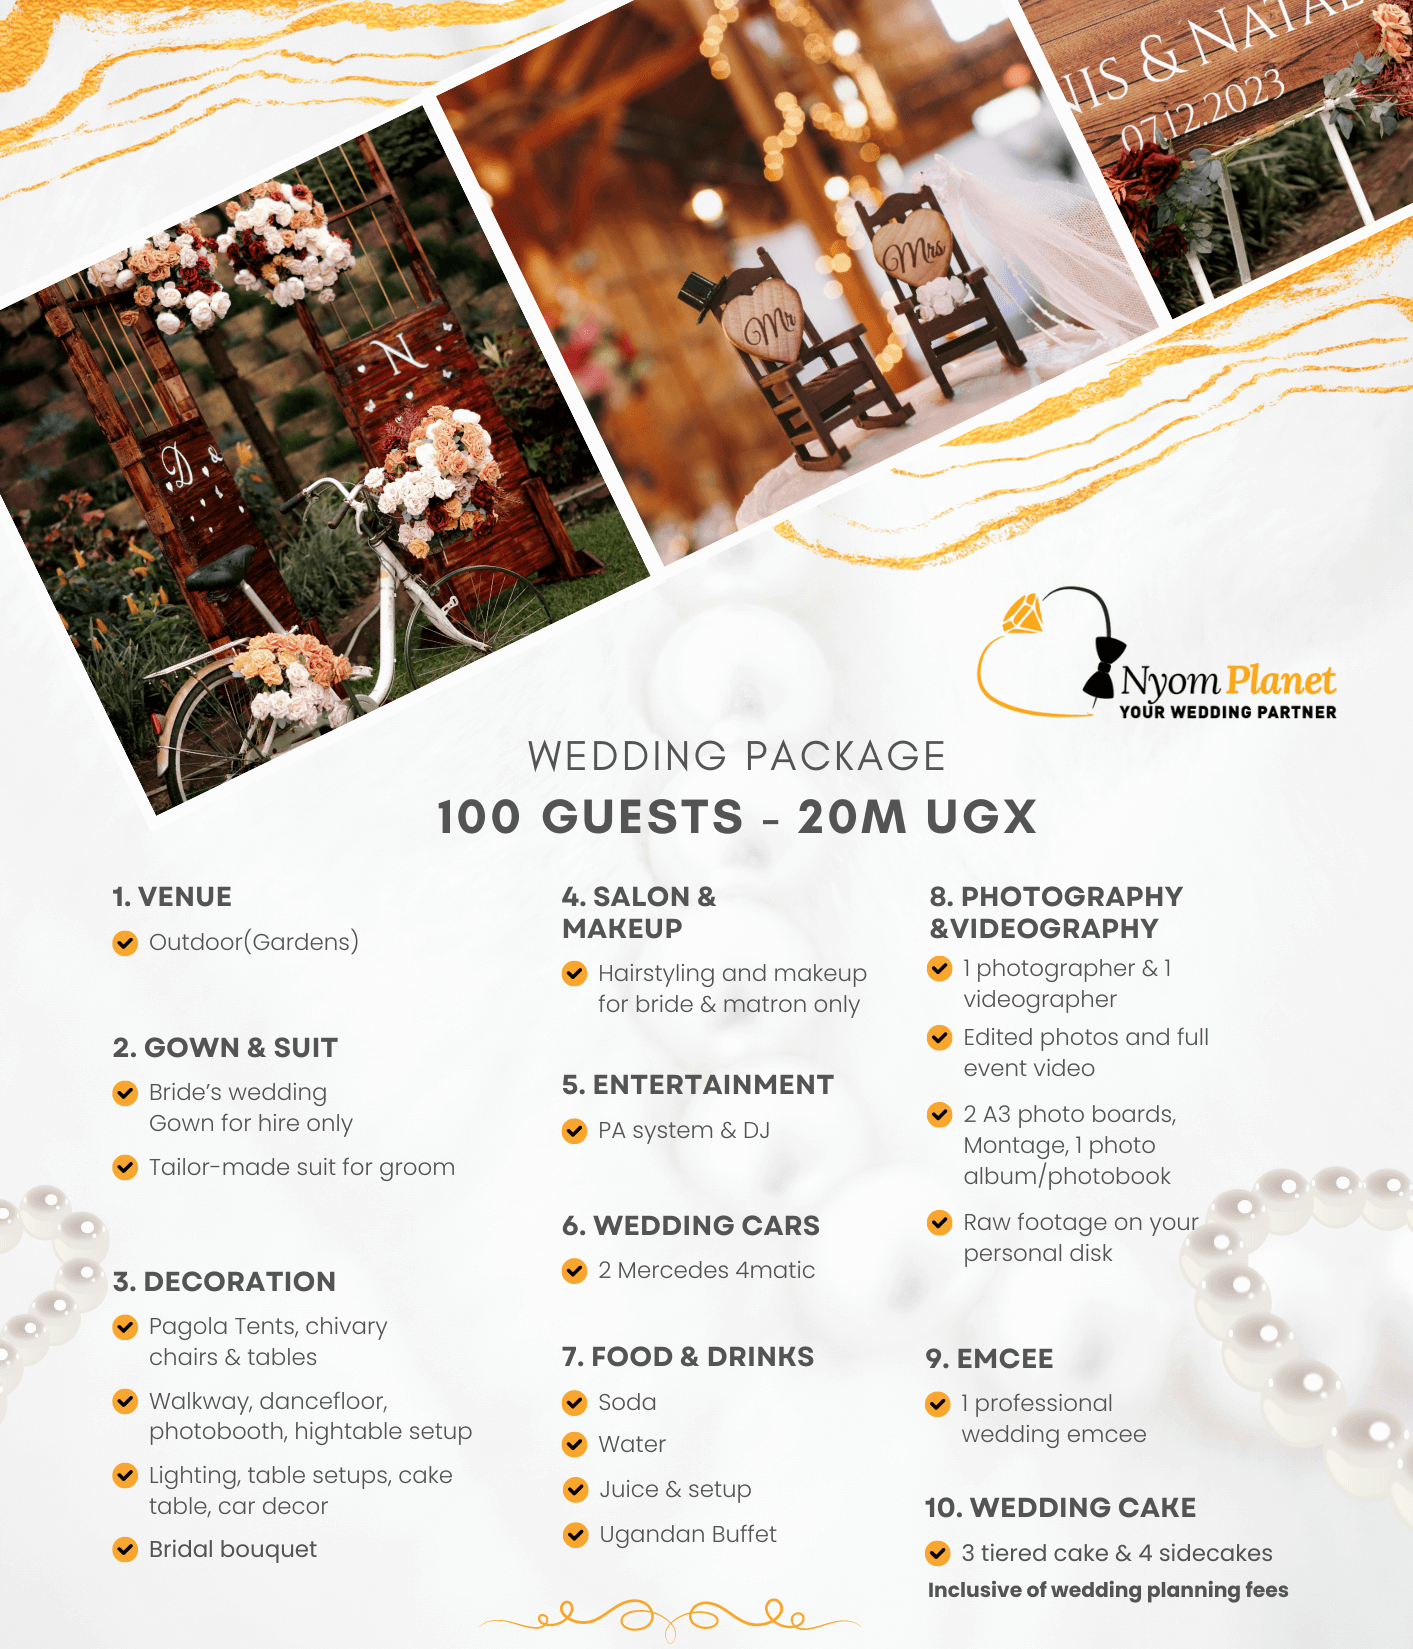 100 Guests wedding package at 20m ugx